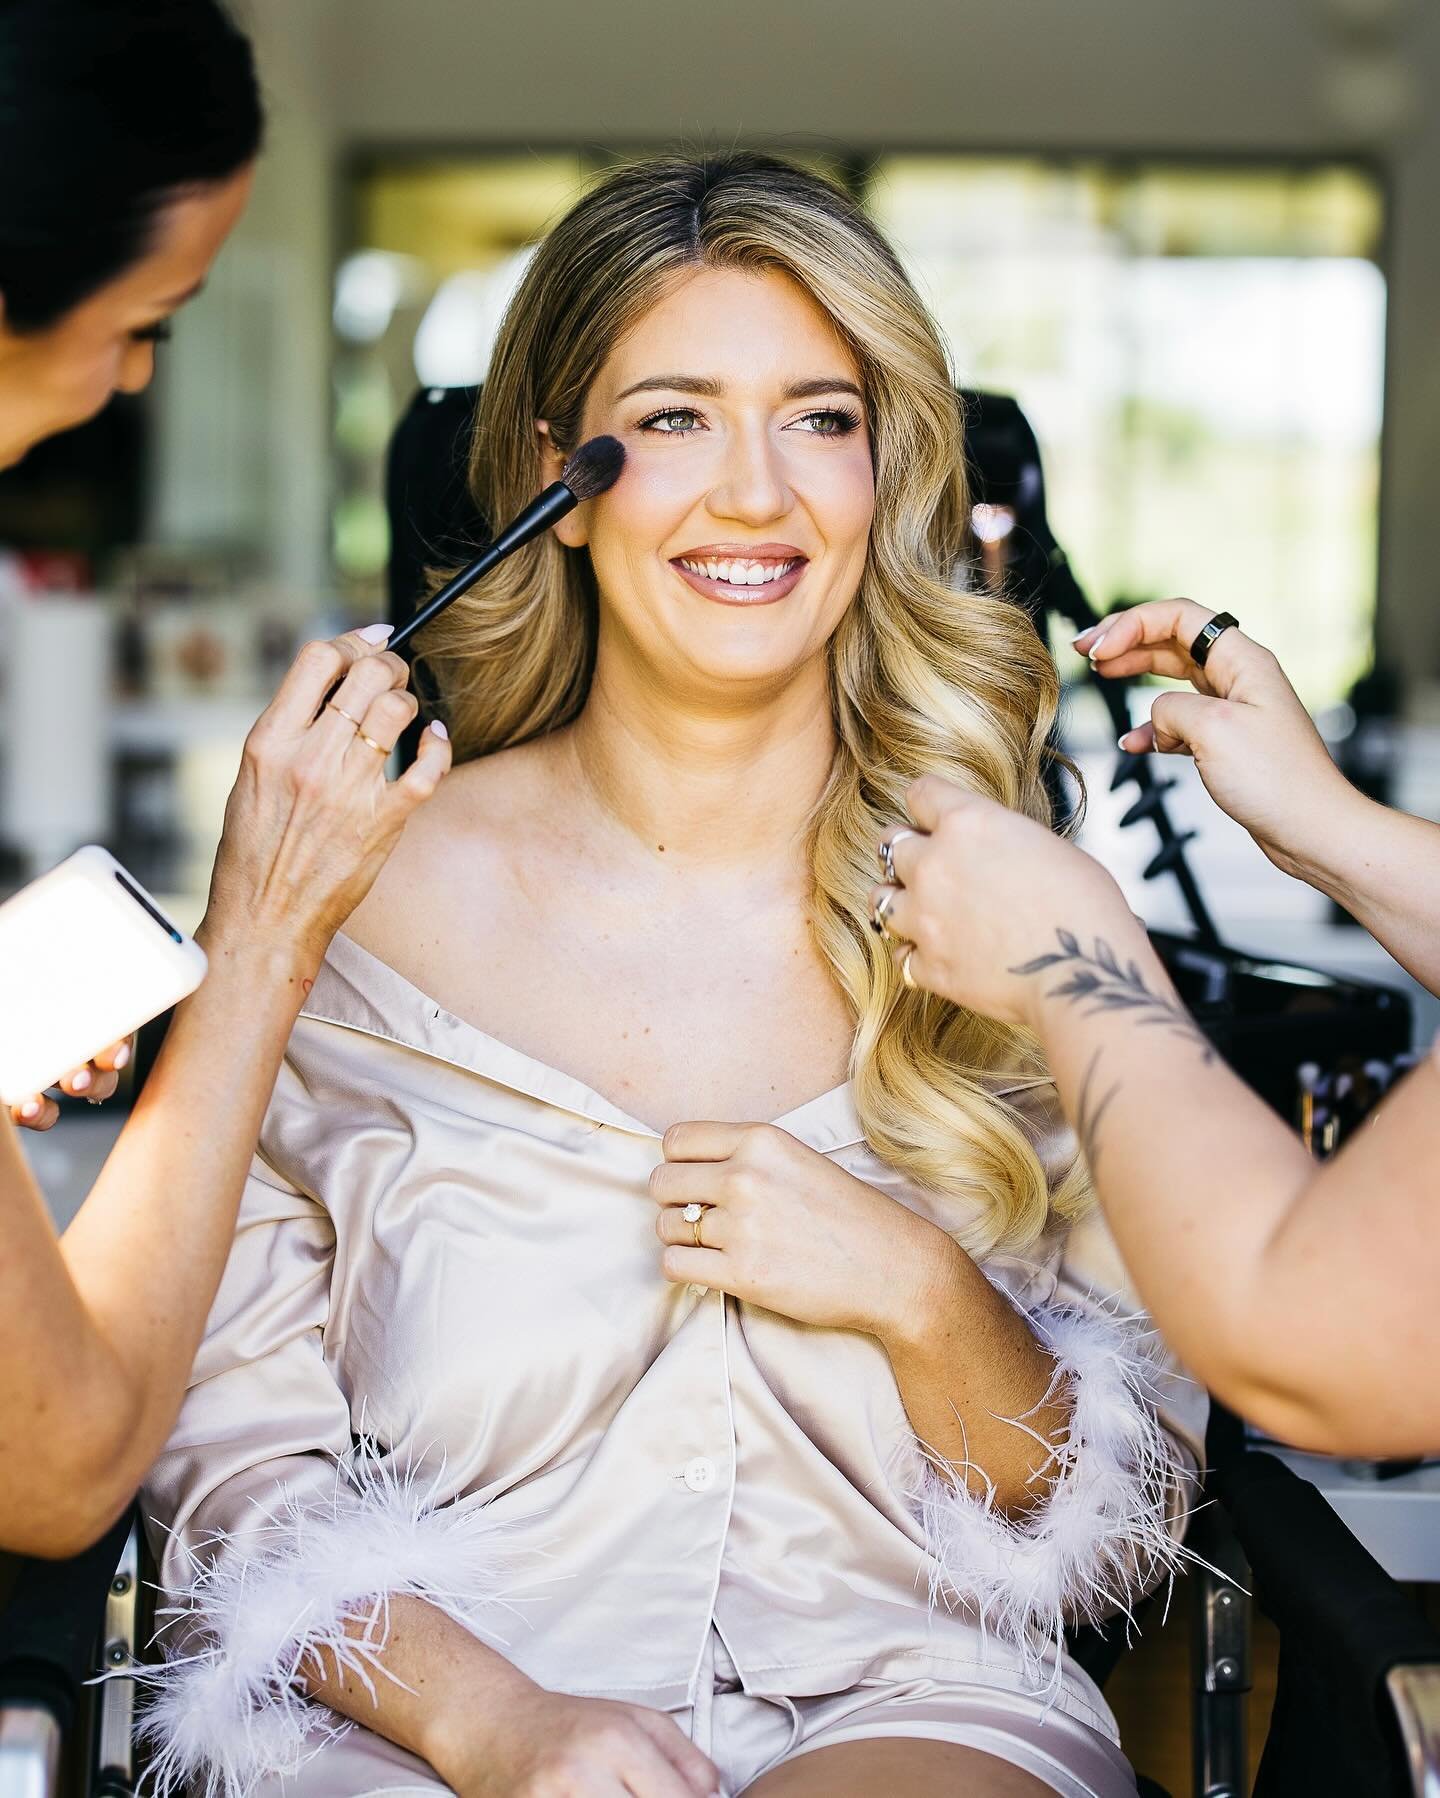 @donna_wegs and I doing our thing on our gorgeous bride @christine_scotto!

📸 @matthewwheelerphoto 

#arizonawedding #arizonabride #azwedding #azbride #azbridalhair #azbridal Arizona wedding, Arizona bride, Arizona bridal hair